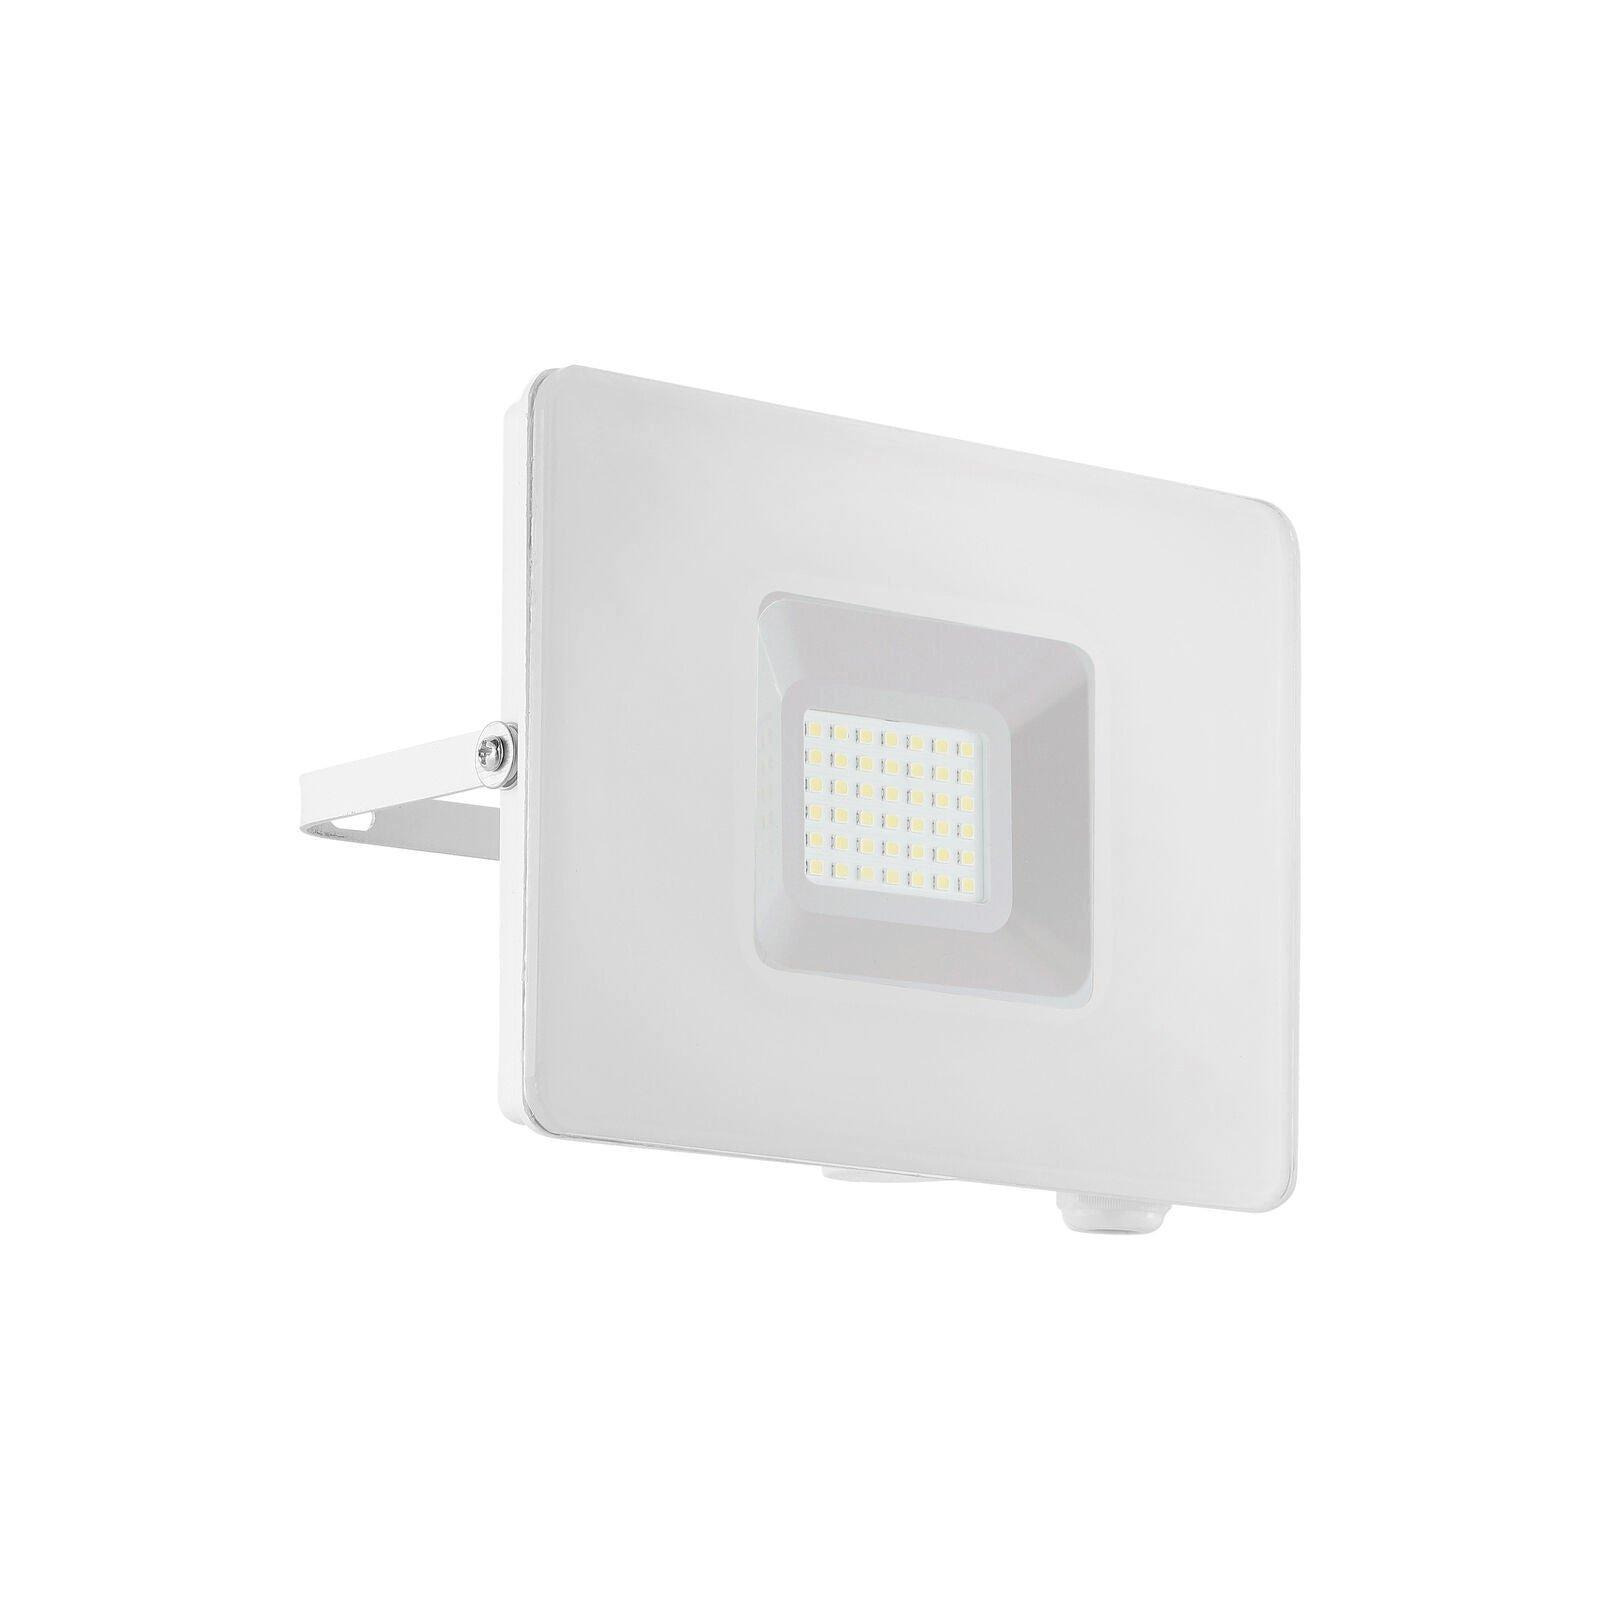 IP65 Outdoor Wall Flood Light White Adjustable 30W Built in LED Porch Lamp - image 1